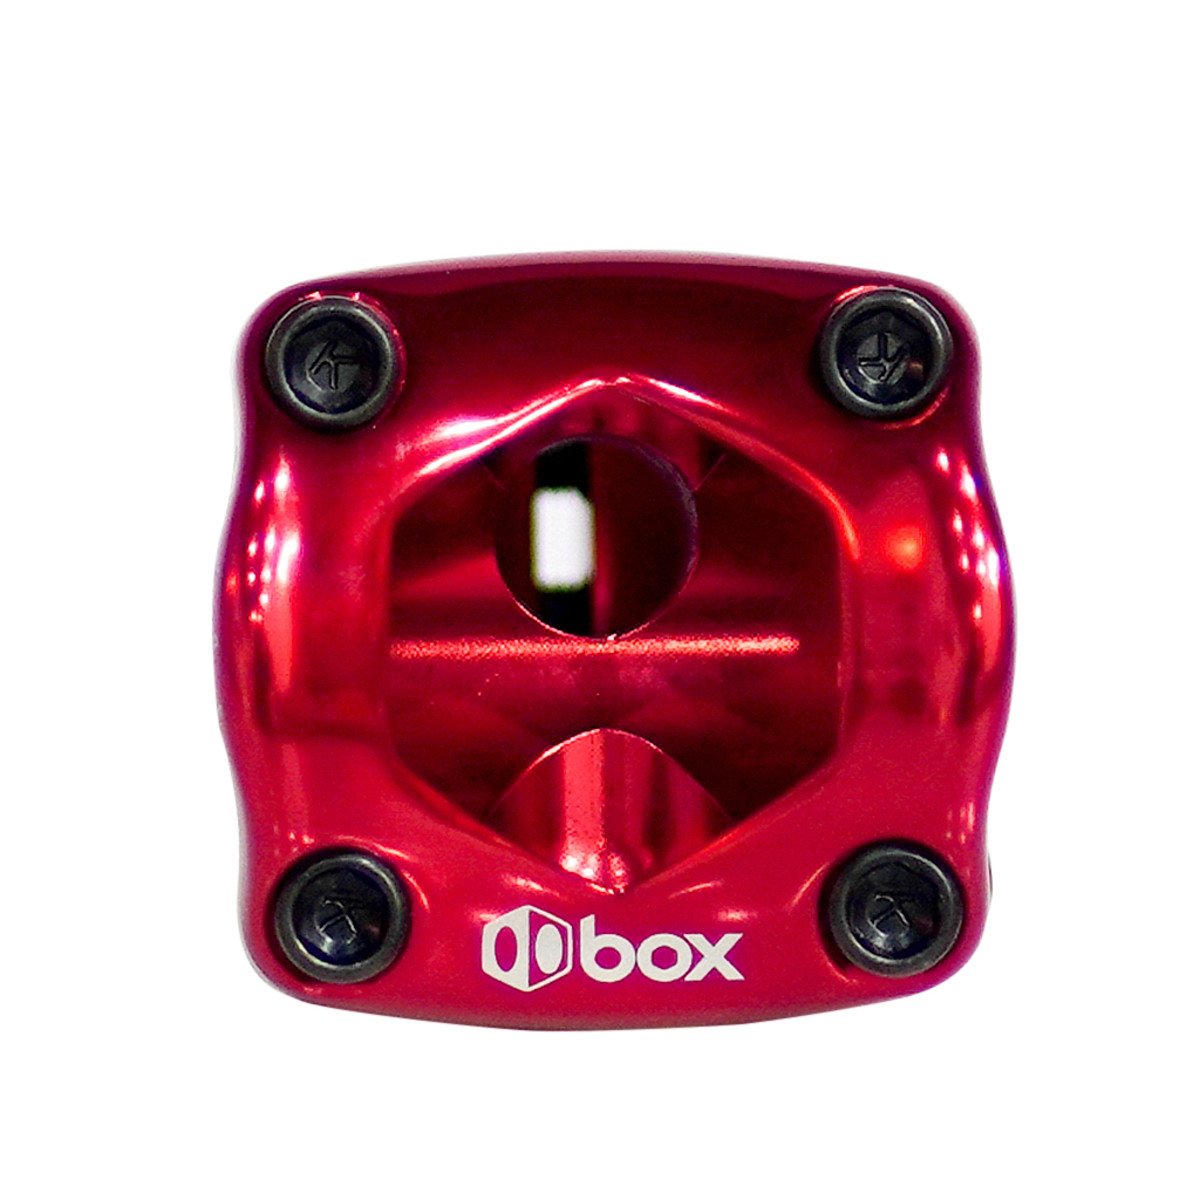 BOX ONE 1 1/8" 31.8MM FRONT LOAD STEM